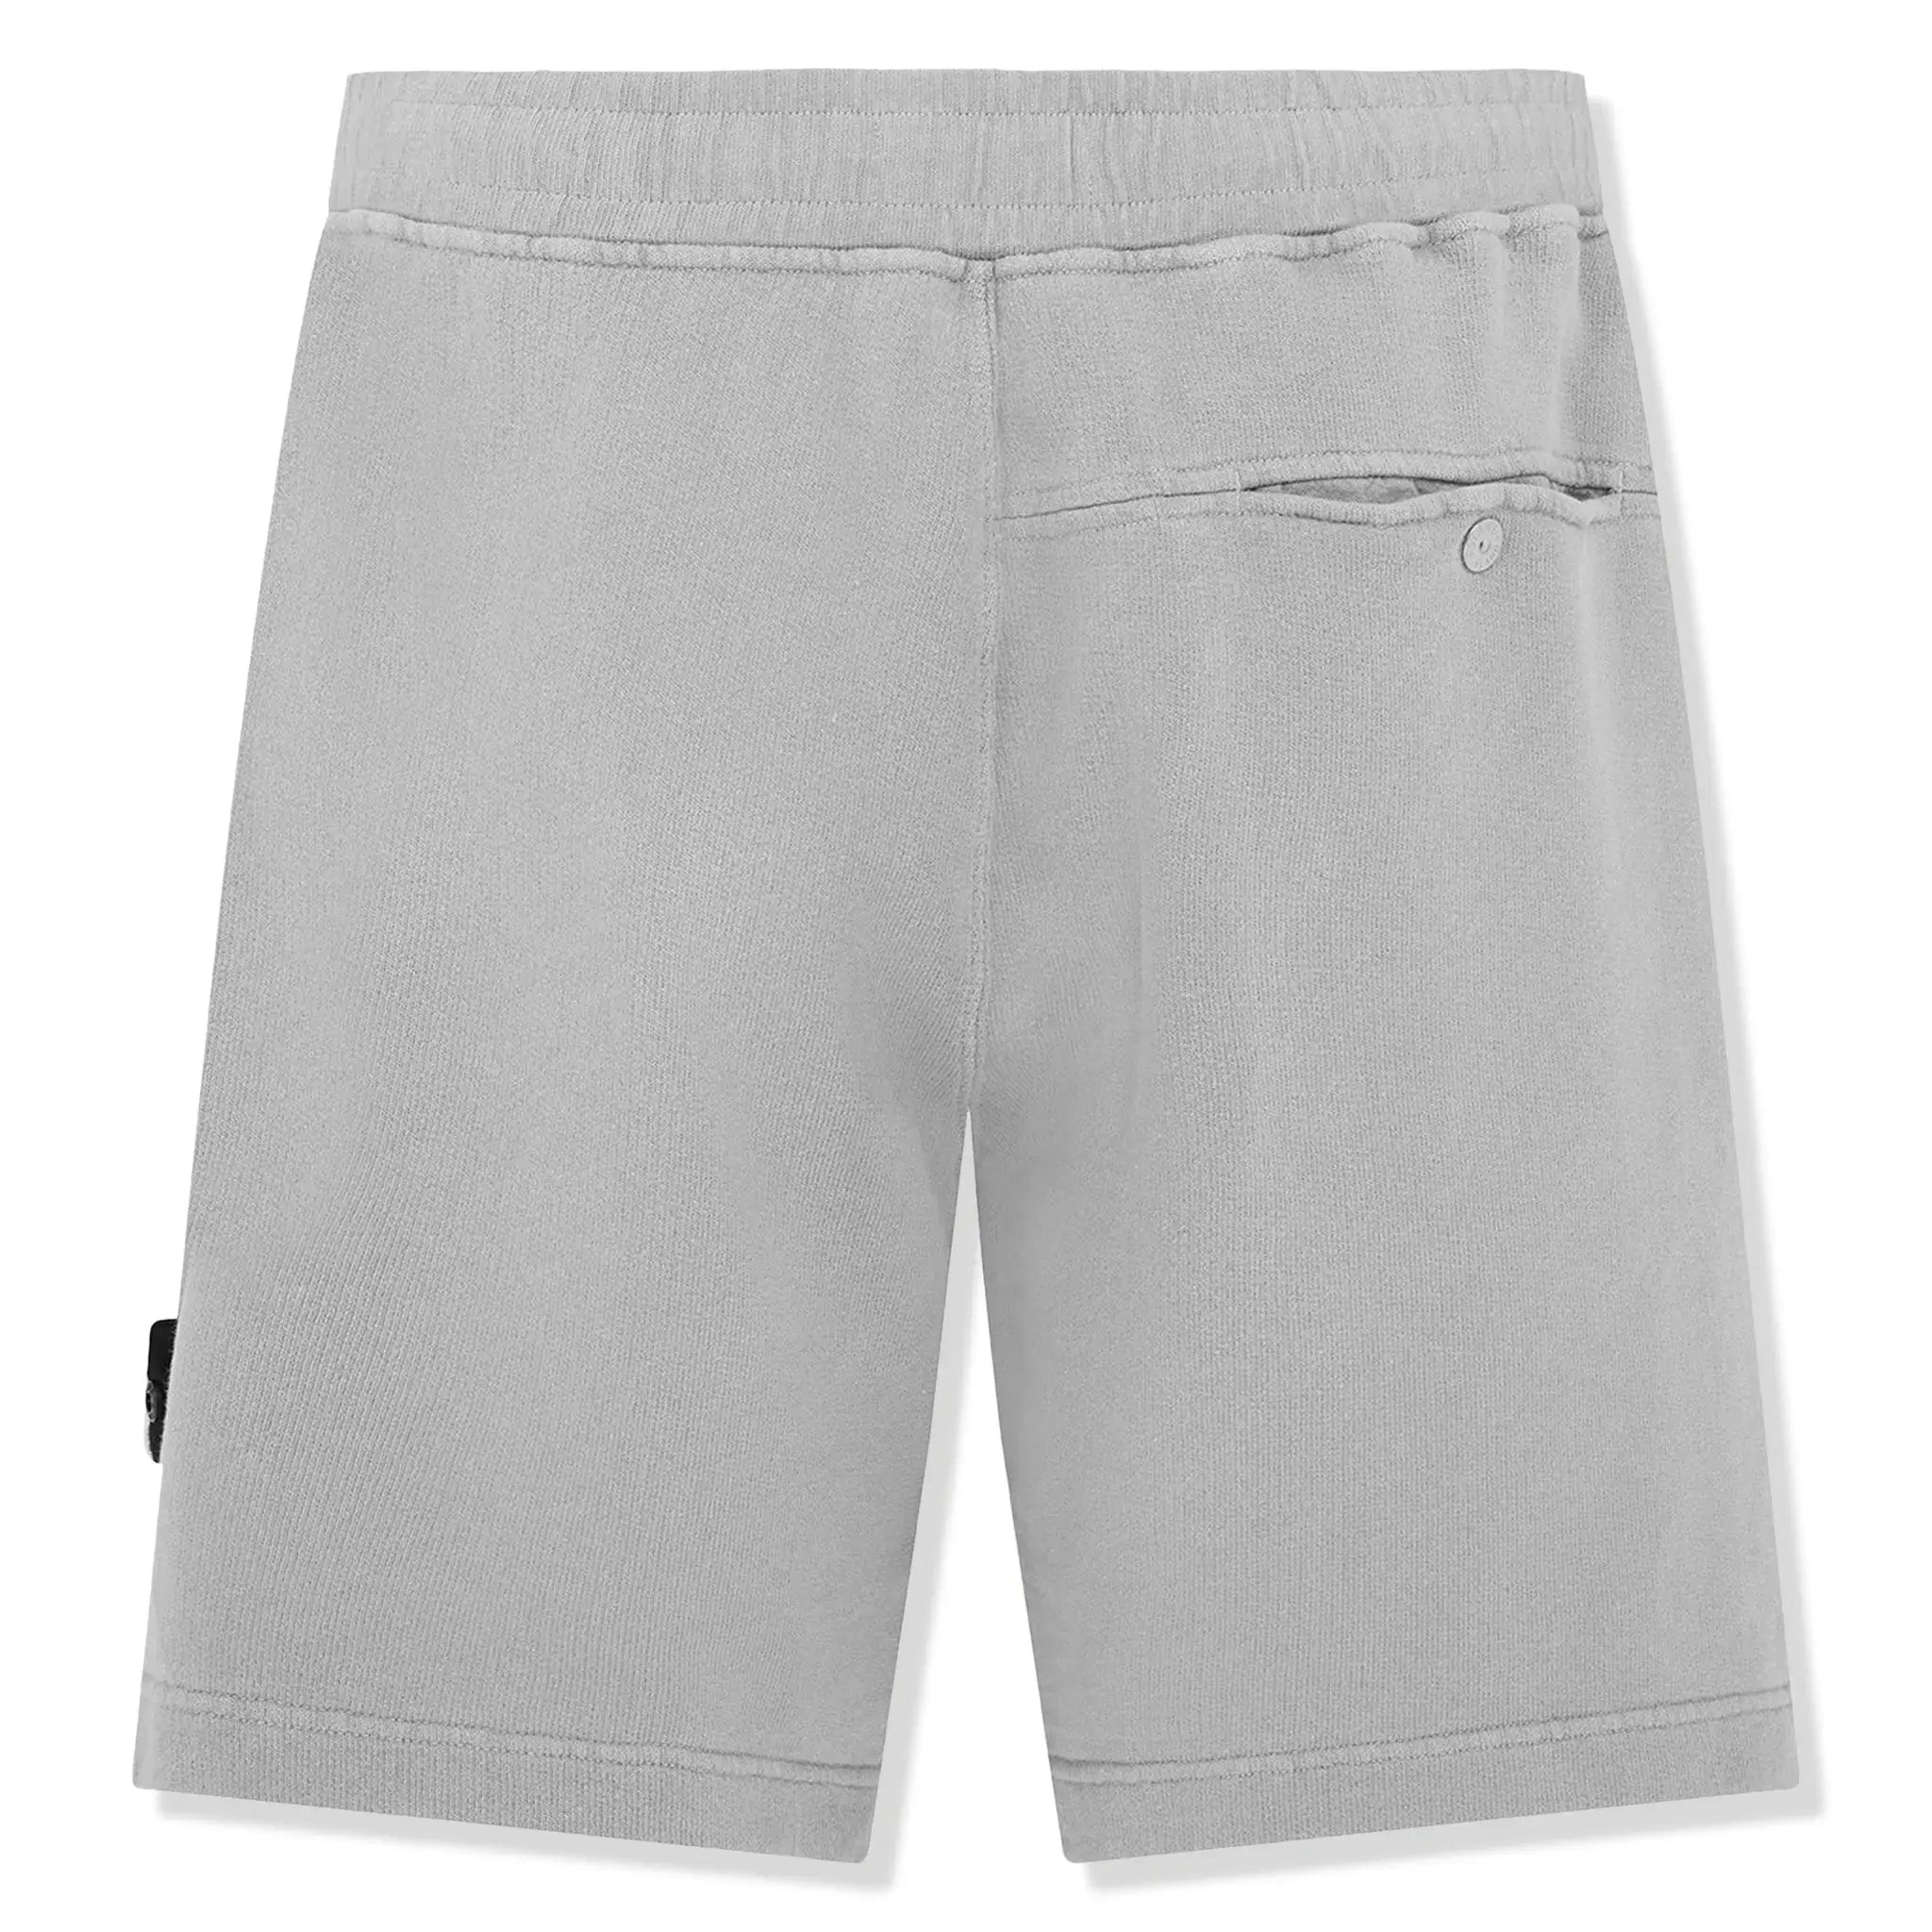 Back view of Stone Island Cotton Loop Grey Shorts